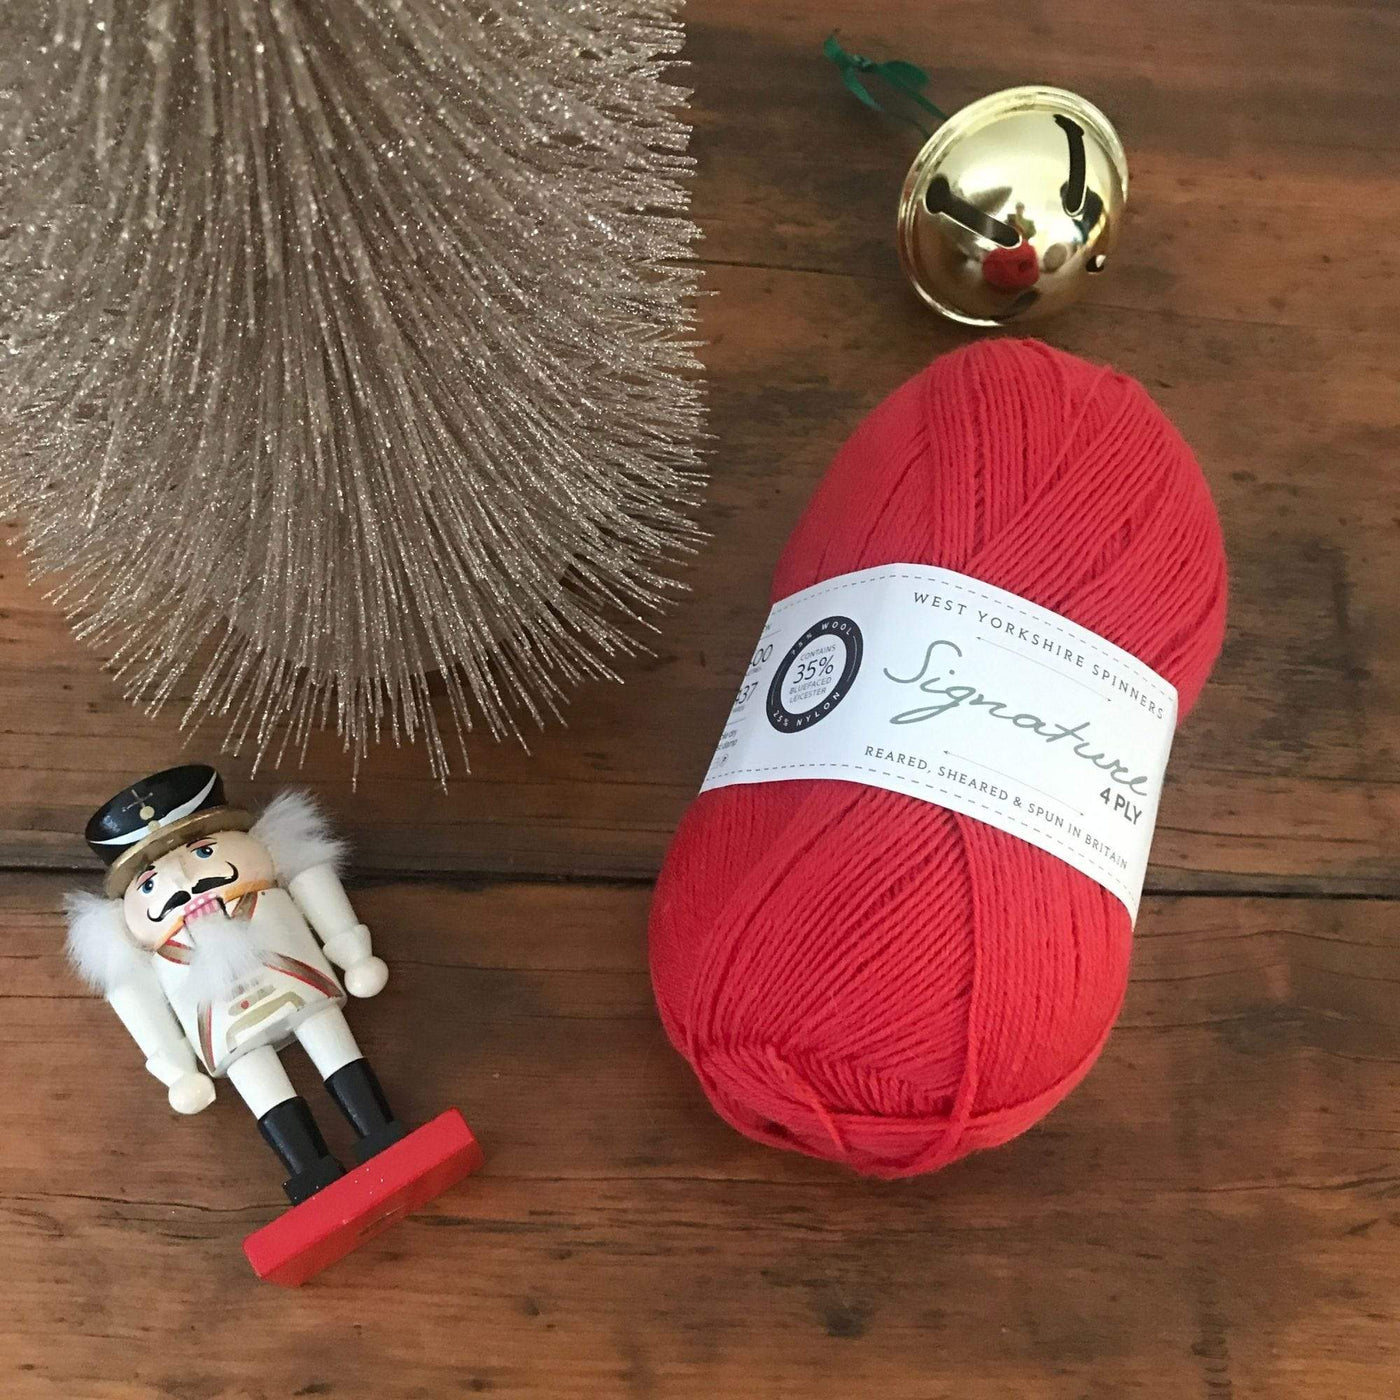 A ball of West Yorkshire Spinners Signature 4ply yarn, fingering weight, on a wood table with Christmas decorations